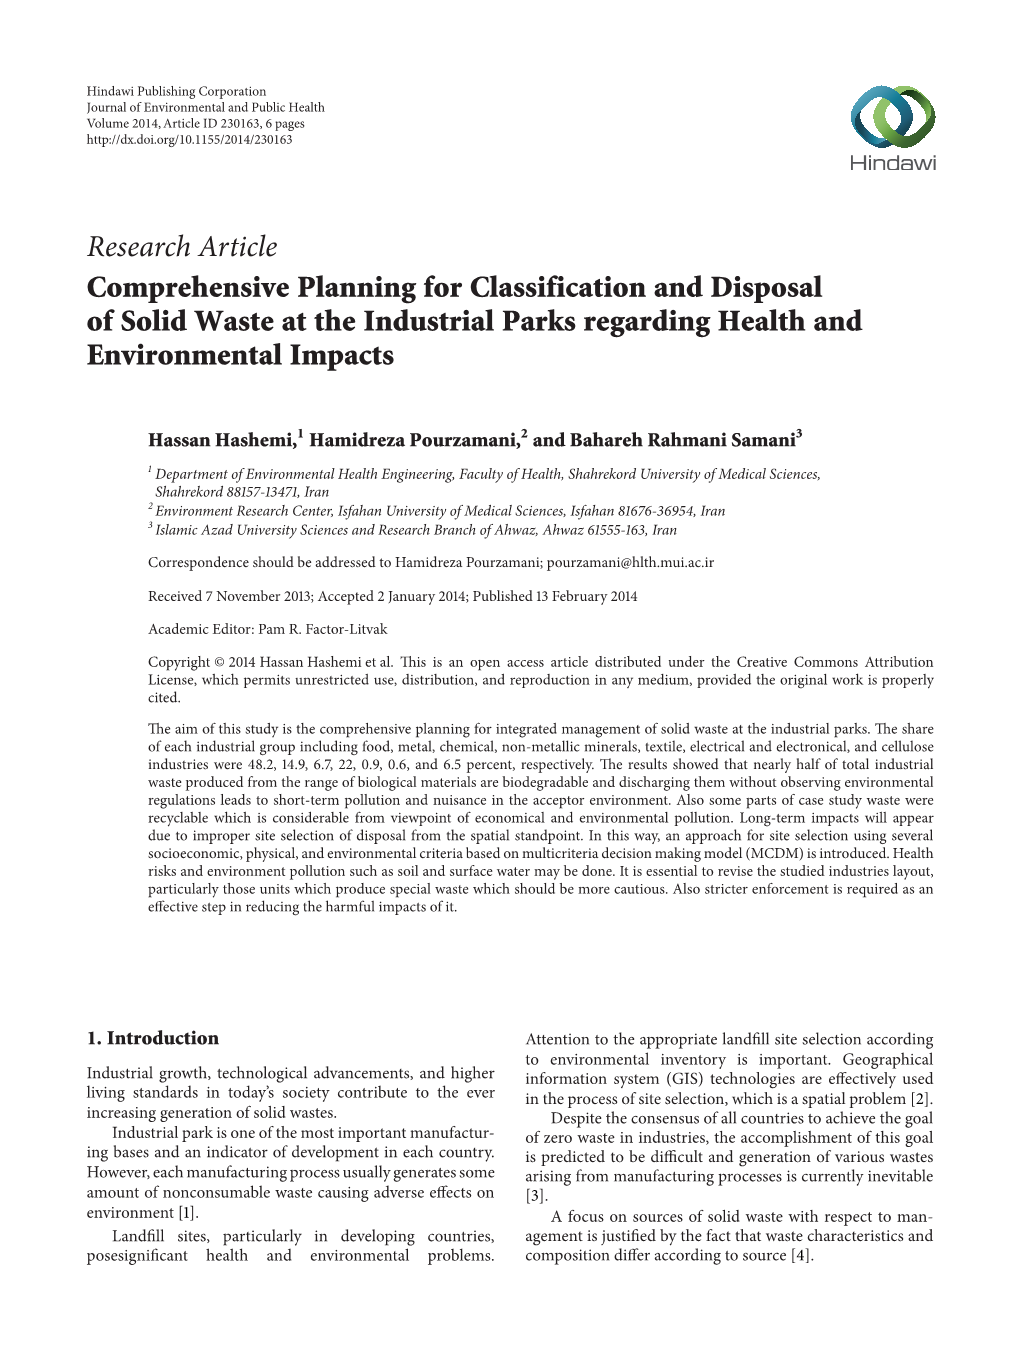 Comprehensive Planning for Classification and Disposal of Solid Waste at the Industrial Parks Regarding Health and Environmental Impacts